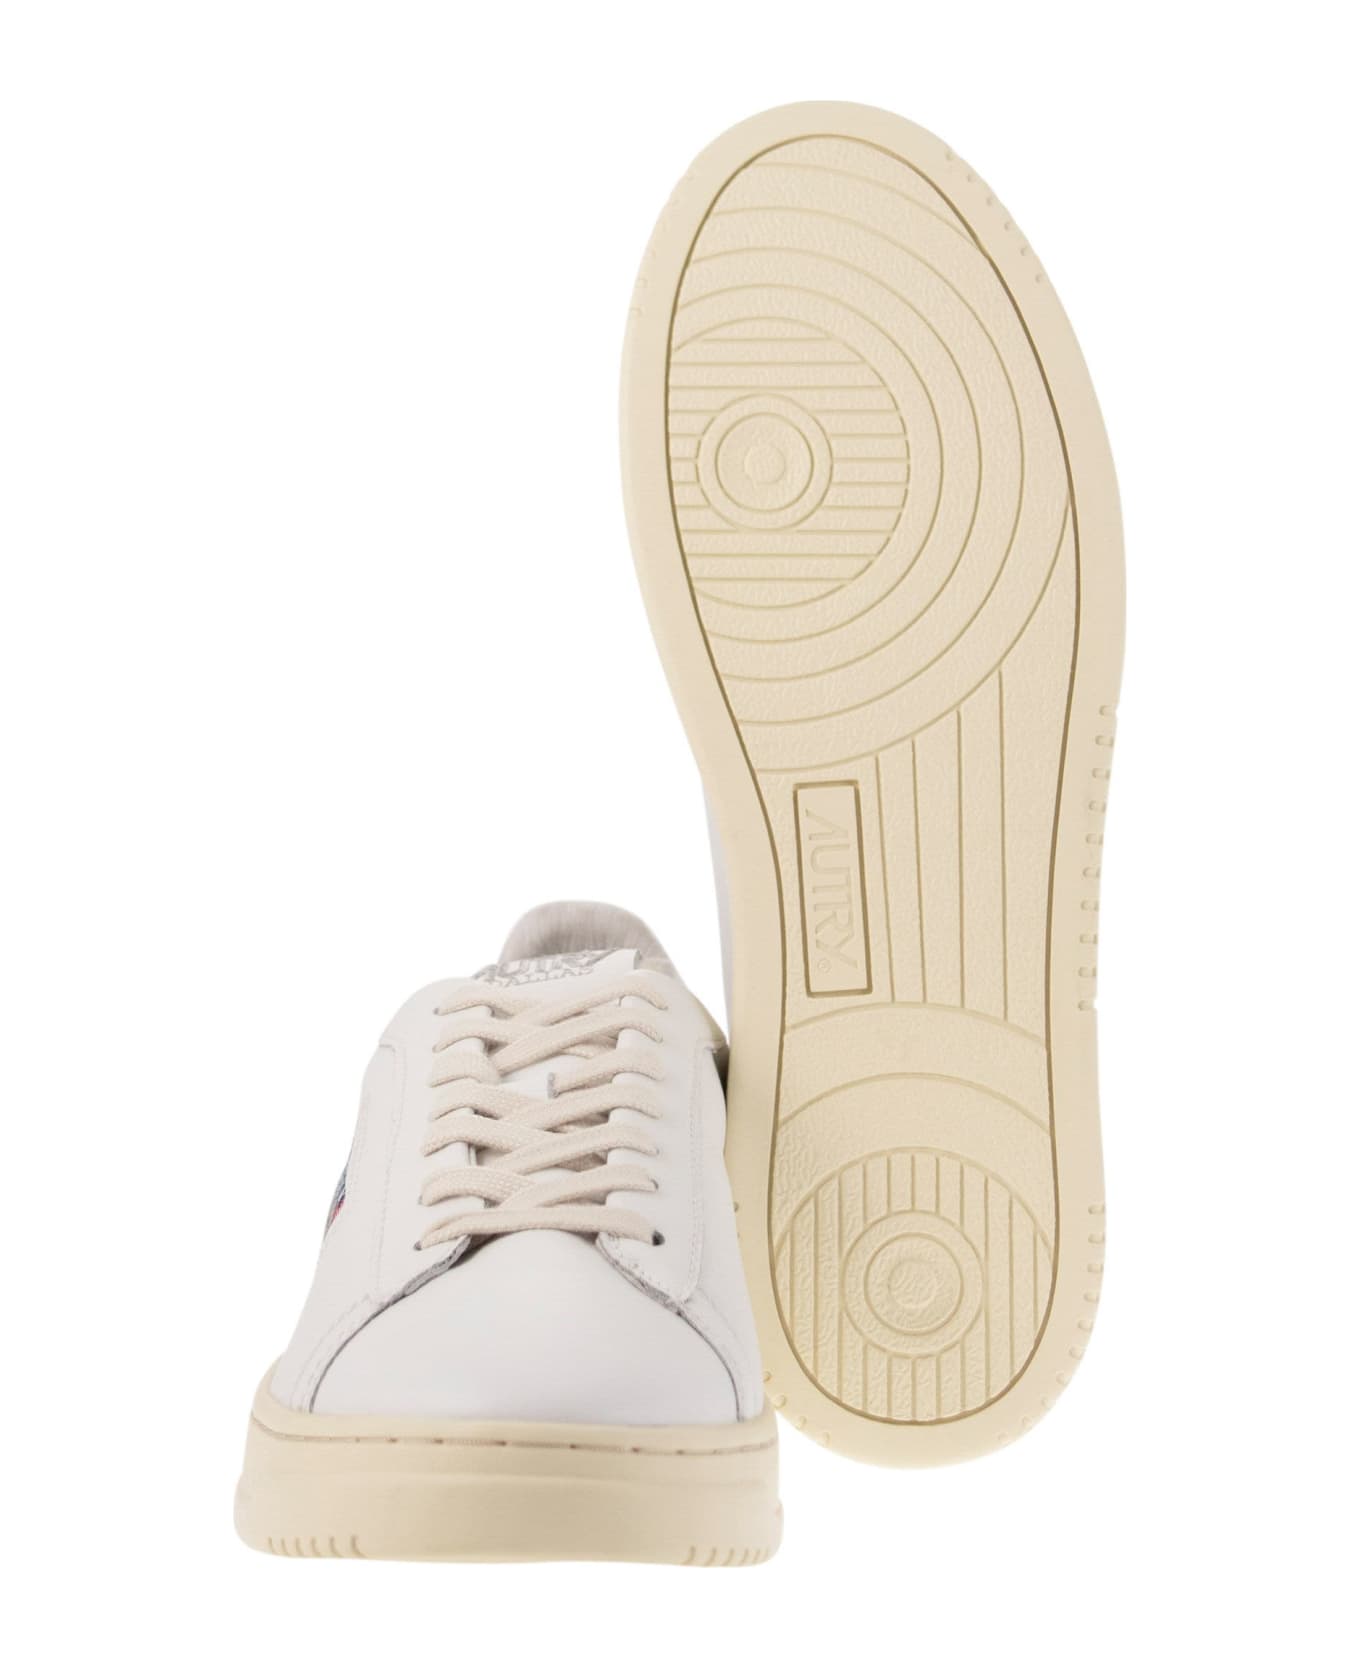 Autry Dallas Low Sneakers In White Leather - White